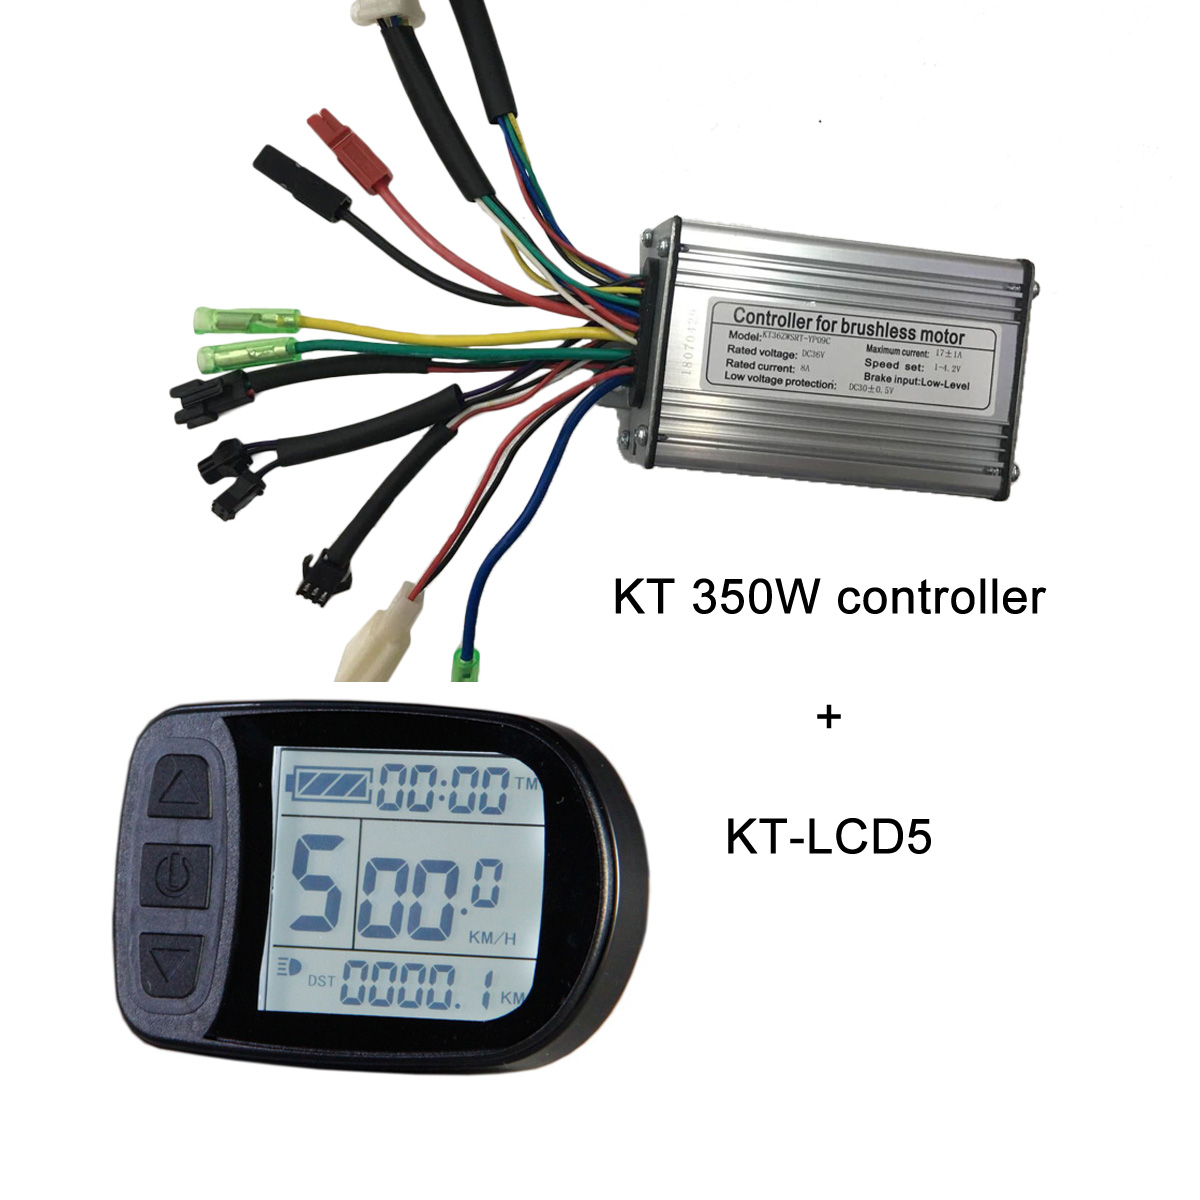 KT controllers wit KT-LCD5 electric bike display